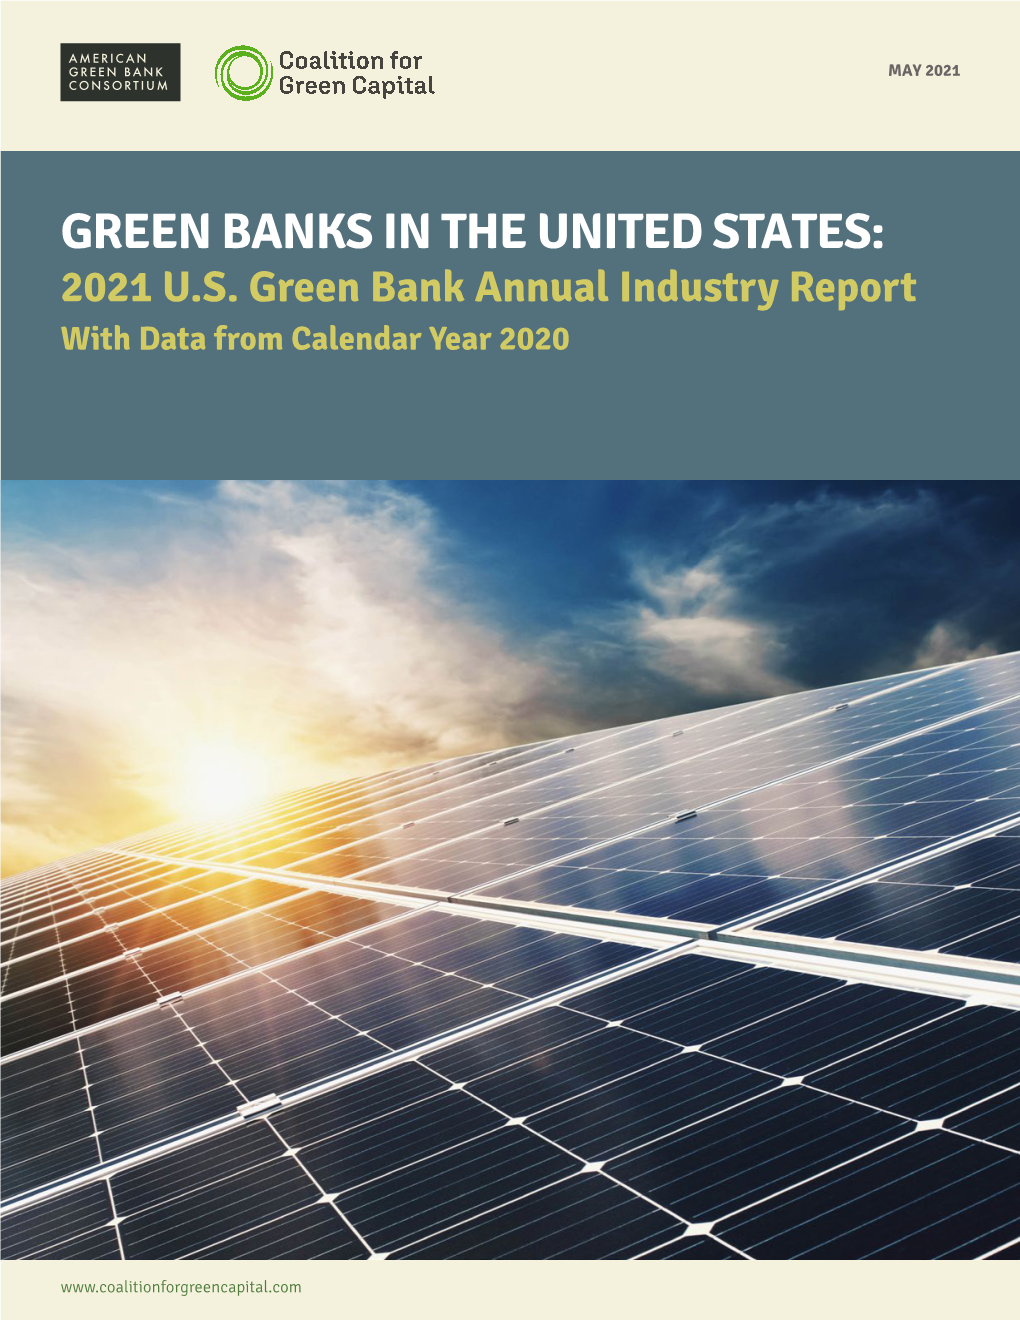 Green Banks in the United States: 2021 U.S